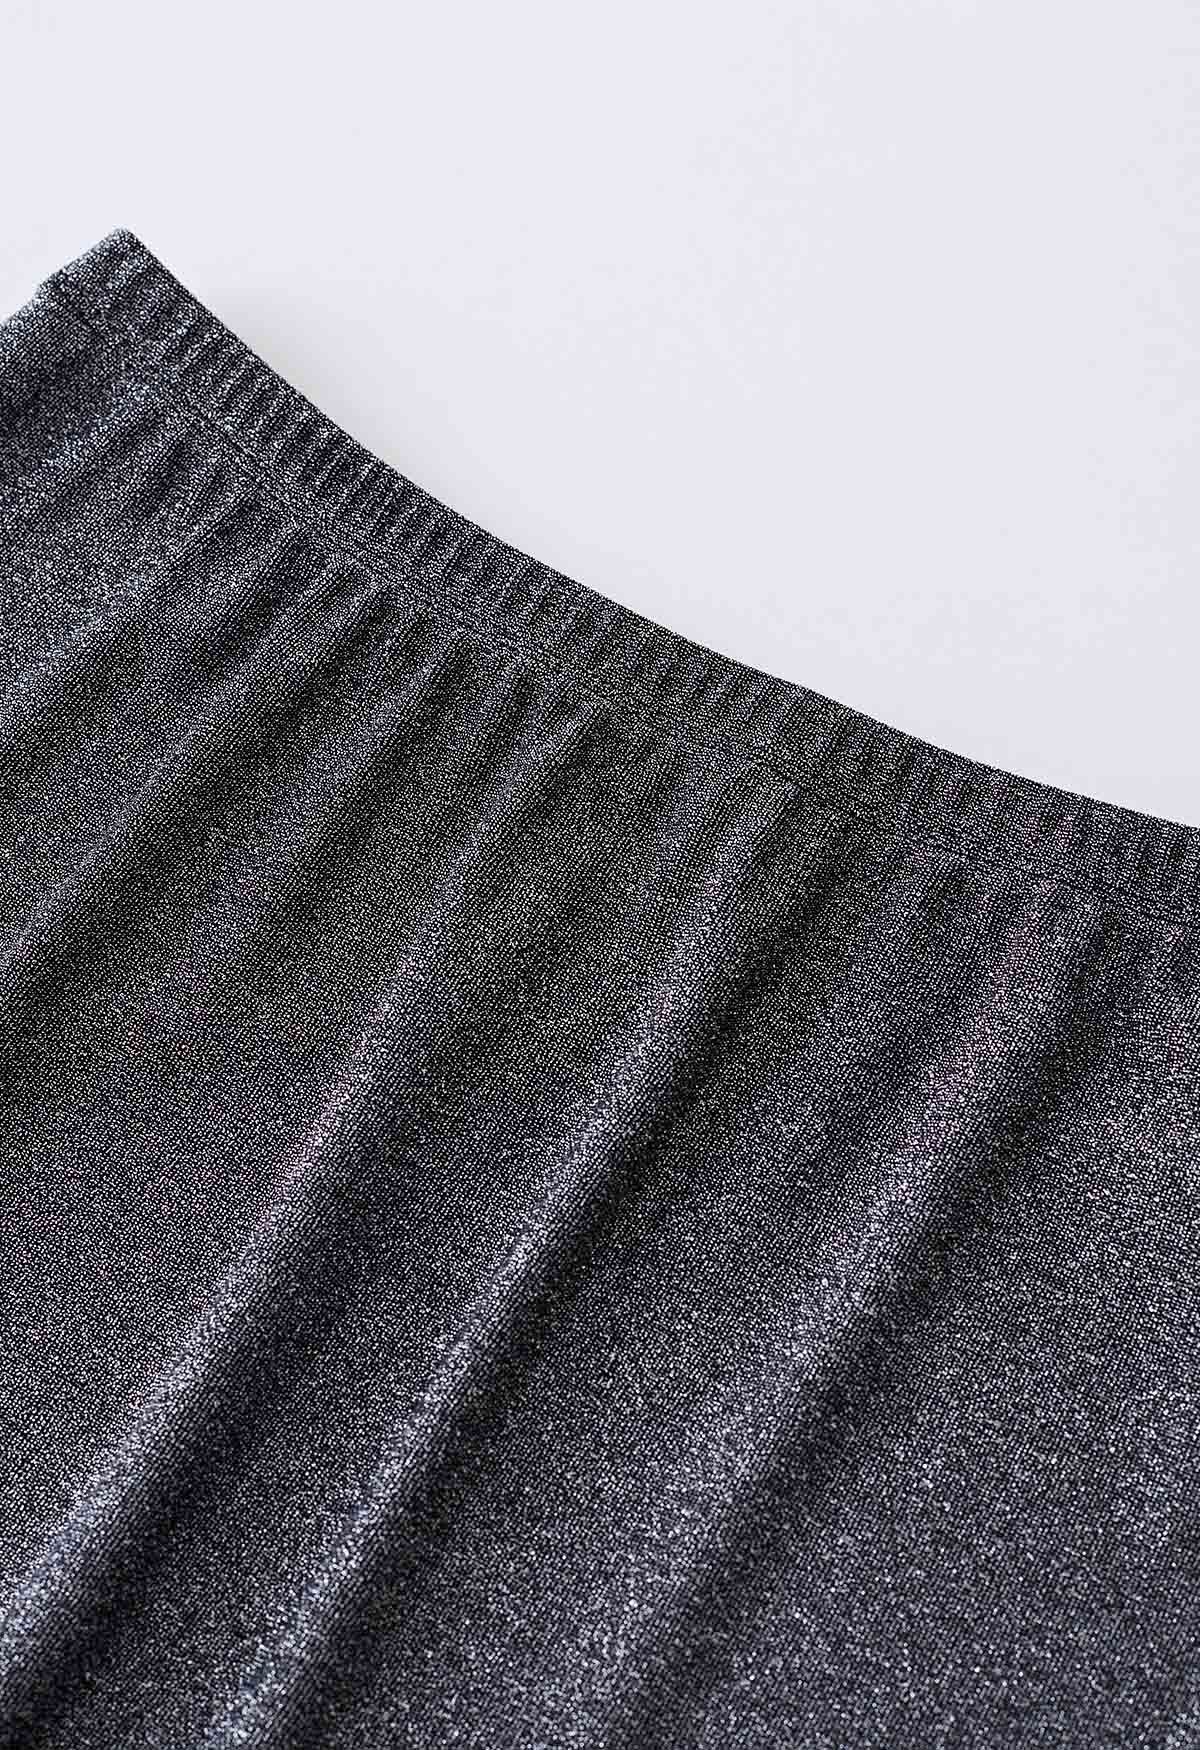 Shimmery Raw-Cut Frilling Maxi Skirt in Silver